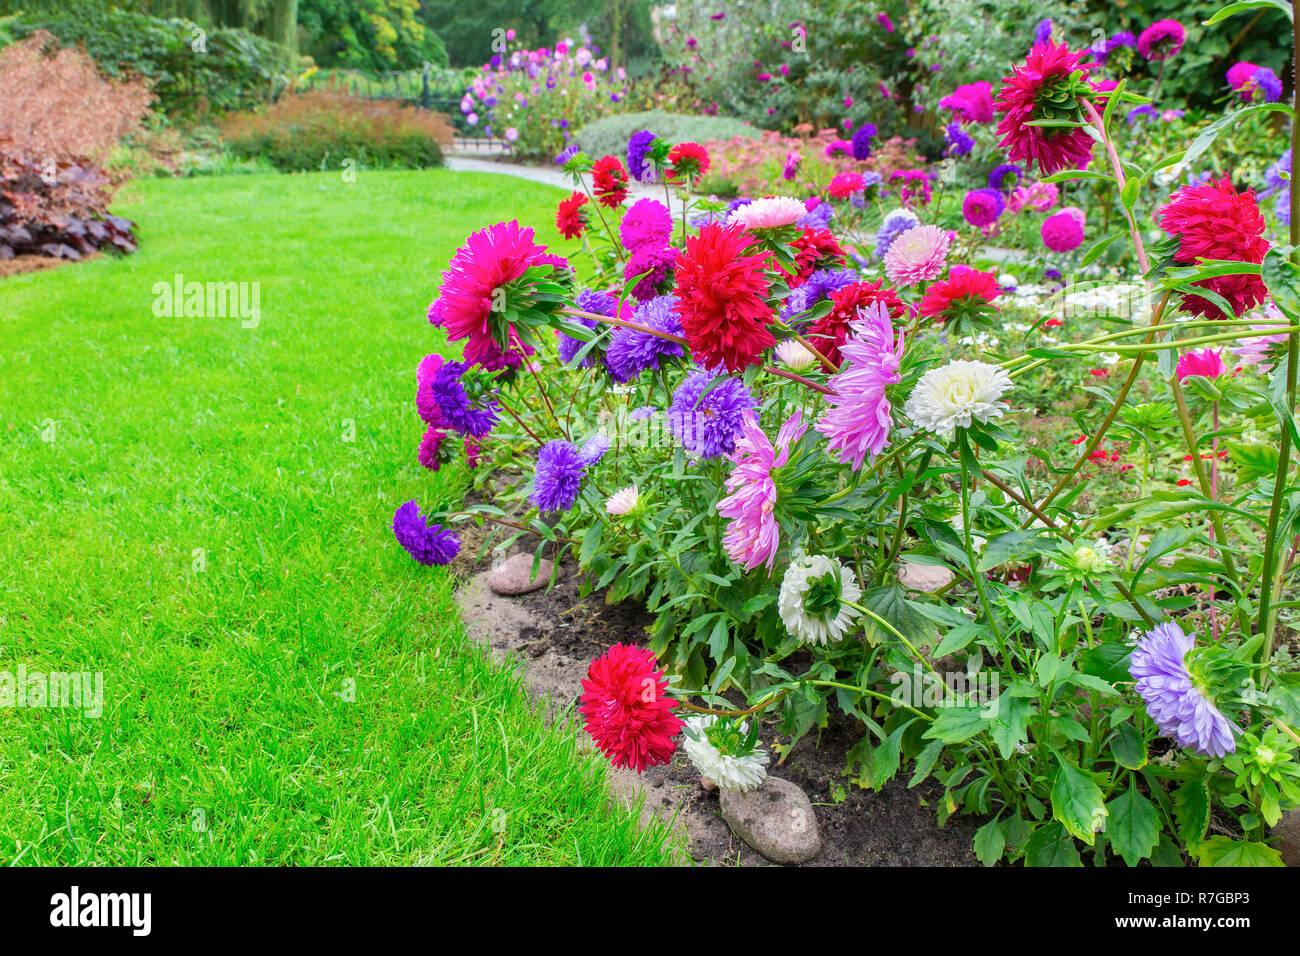 Backyard with blooming Callistephus chinensis flowers and green lawn Stock Photo